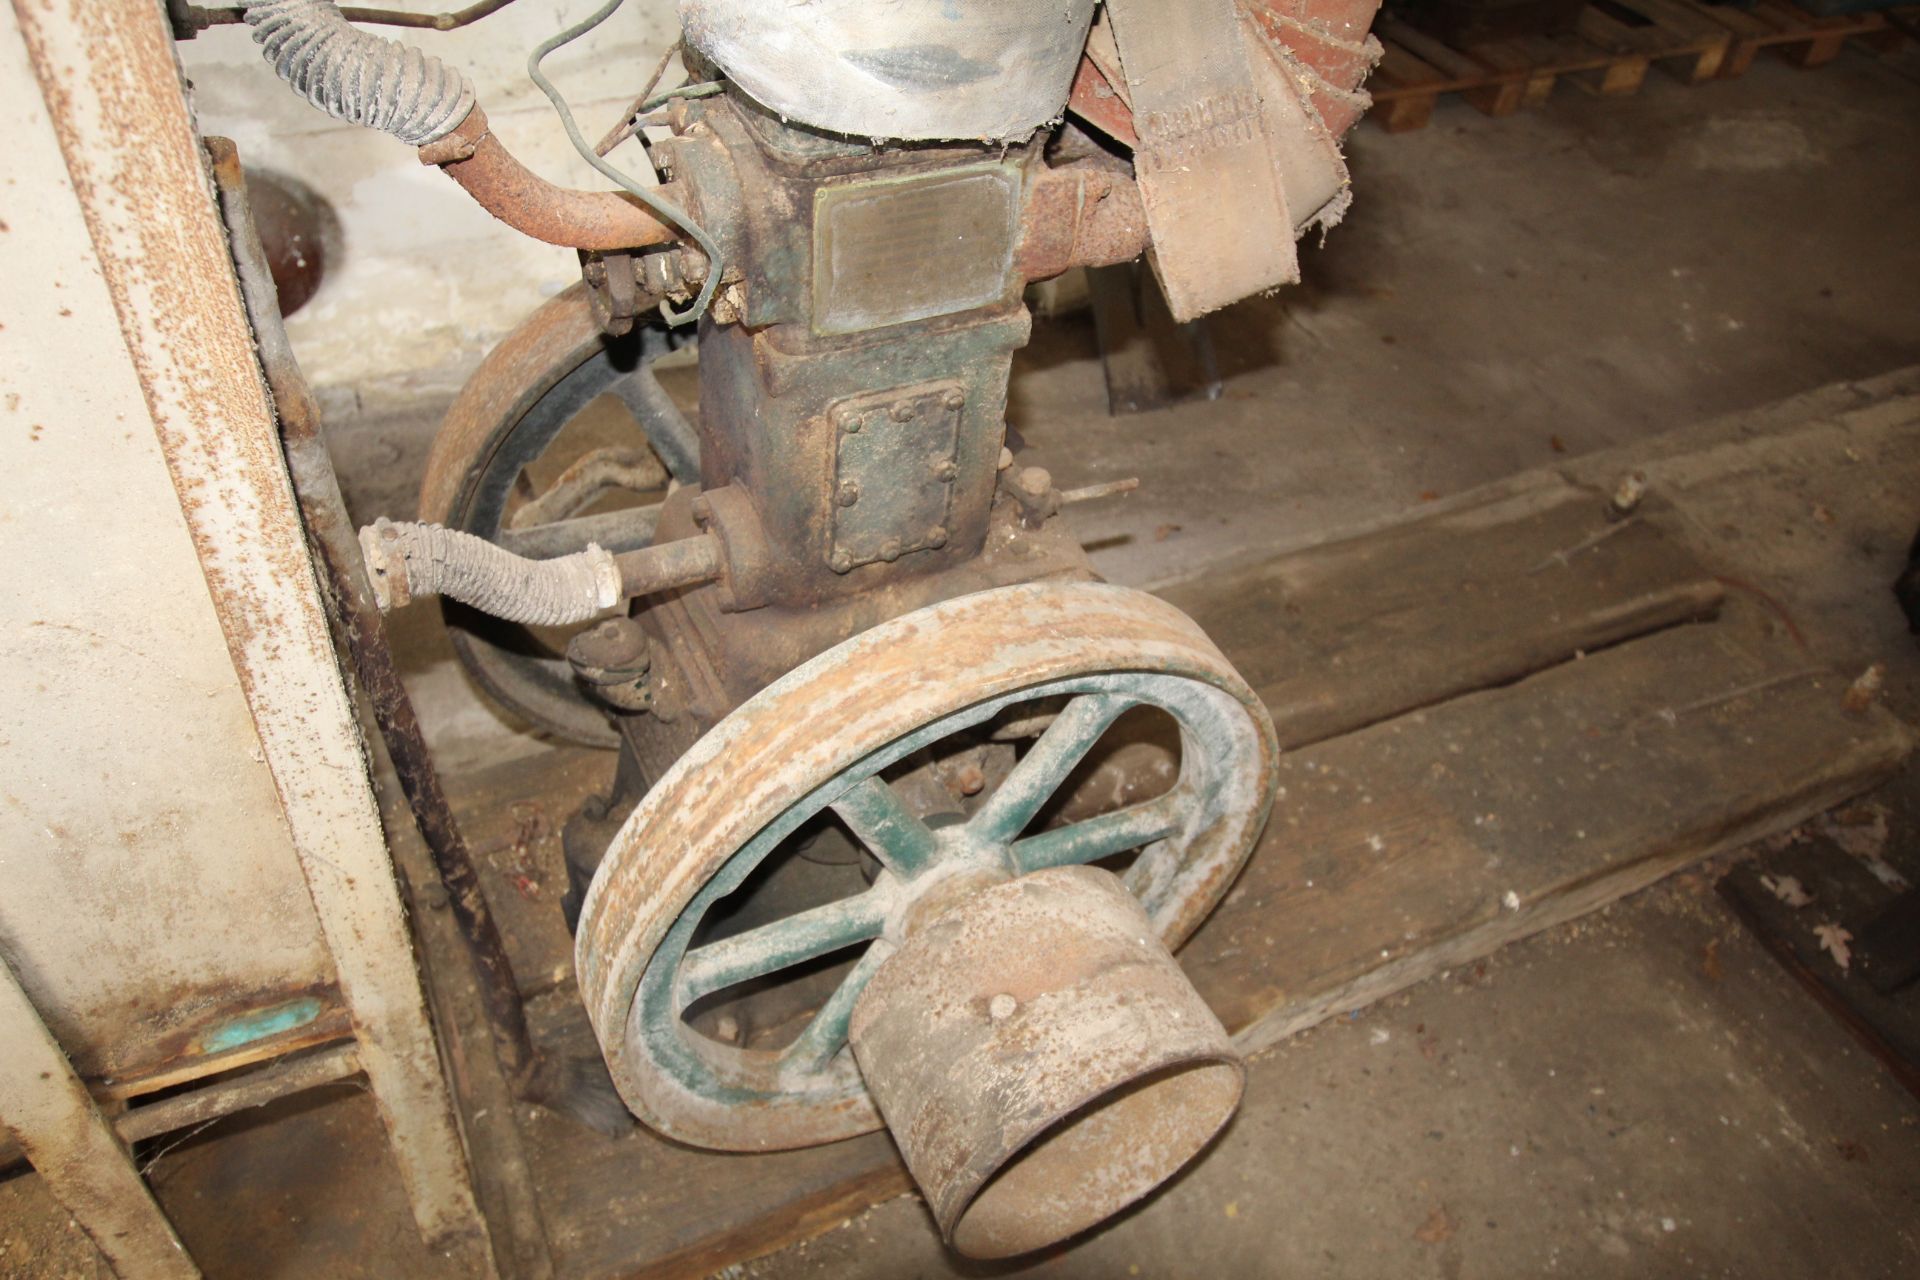 R A Lister & Co stationary engine. Owned from new. To be sold in situ and removed at purchaser’s - Bild 2 aus 7